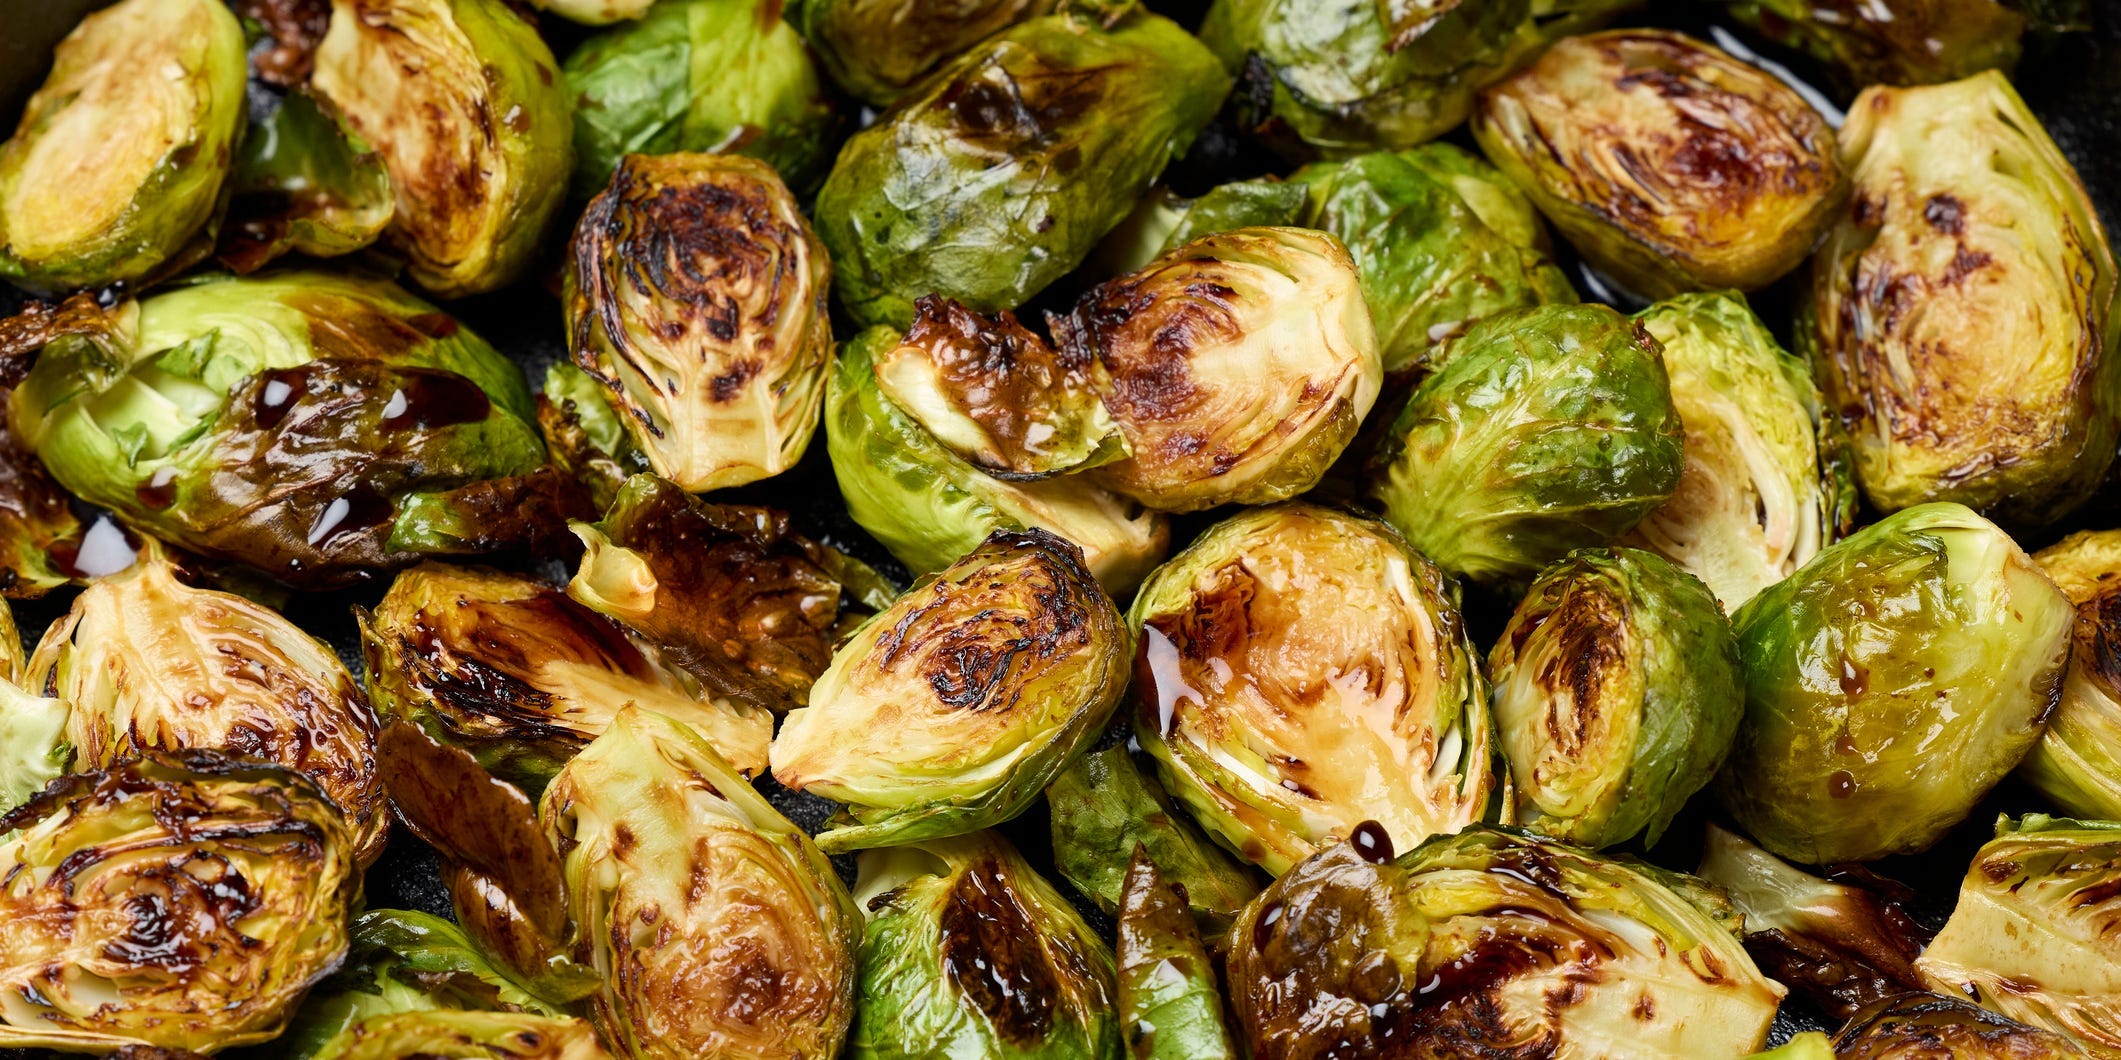 Many roasted and glazed brussels sprouts